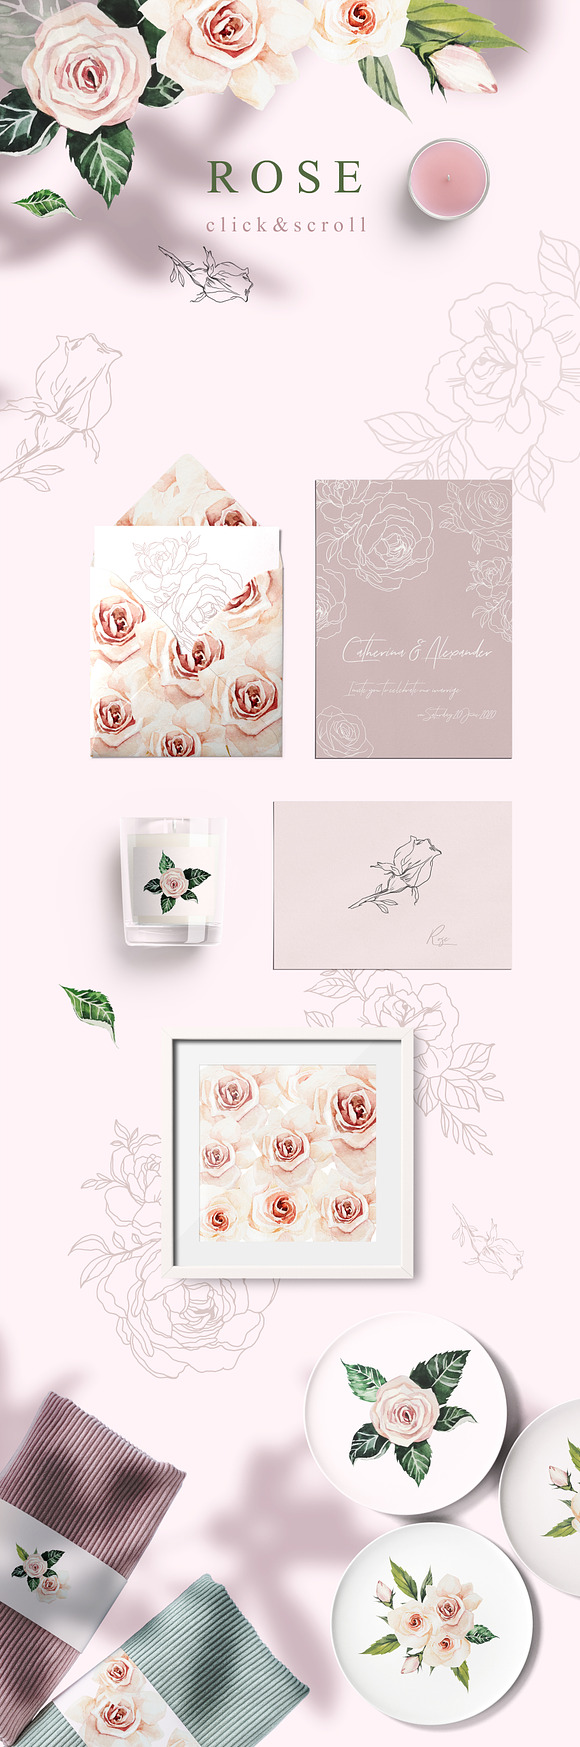 FLOWERS & FRUITS in Illustrations - product preview 9